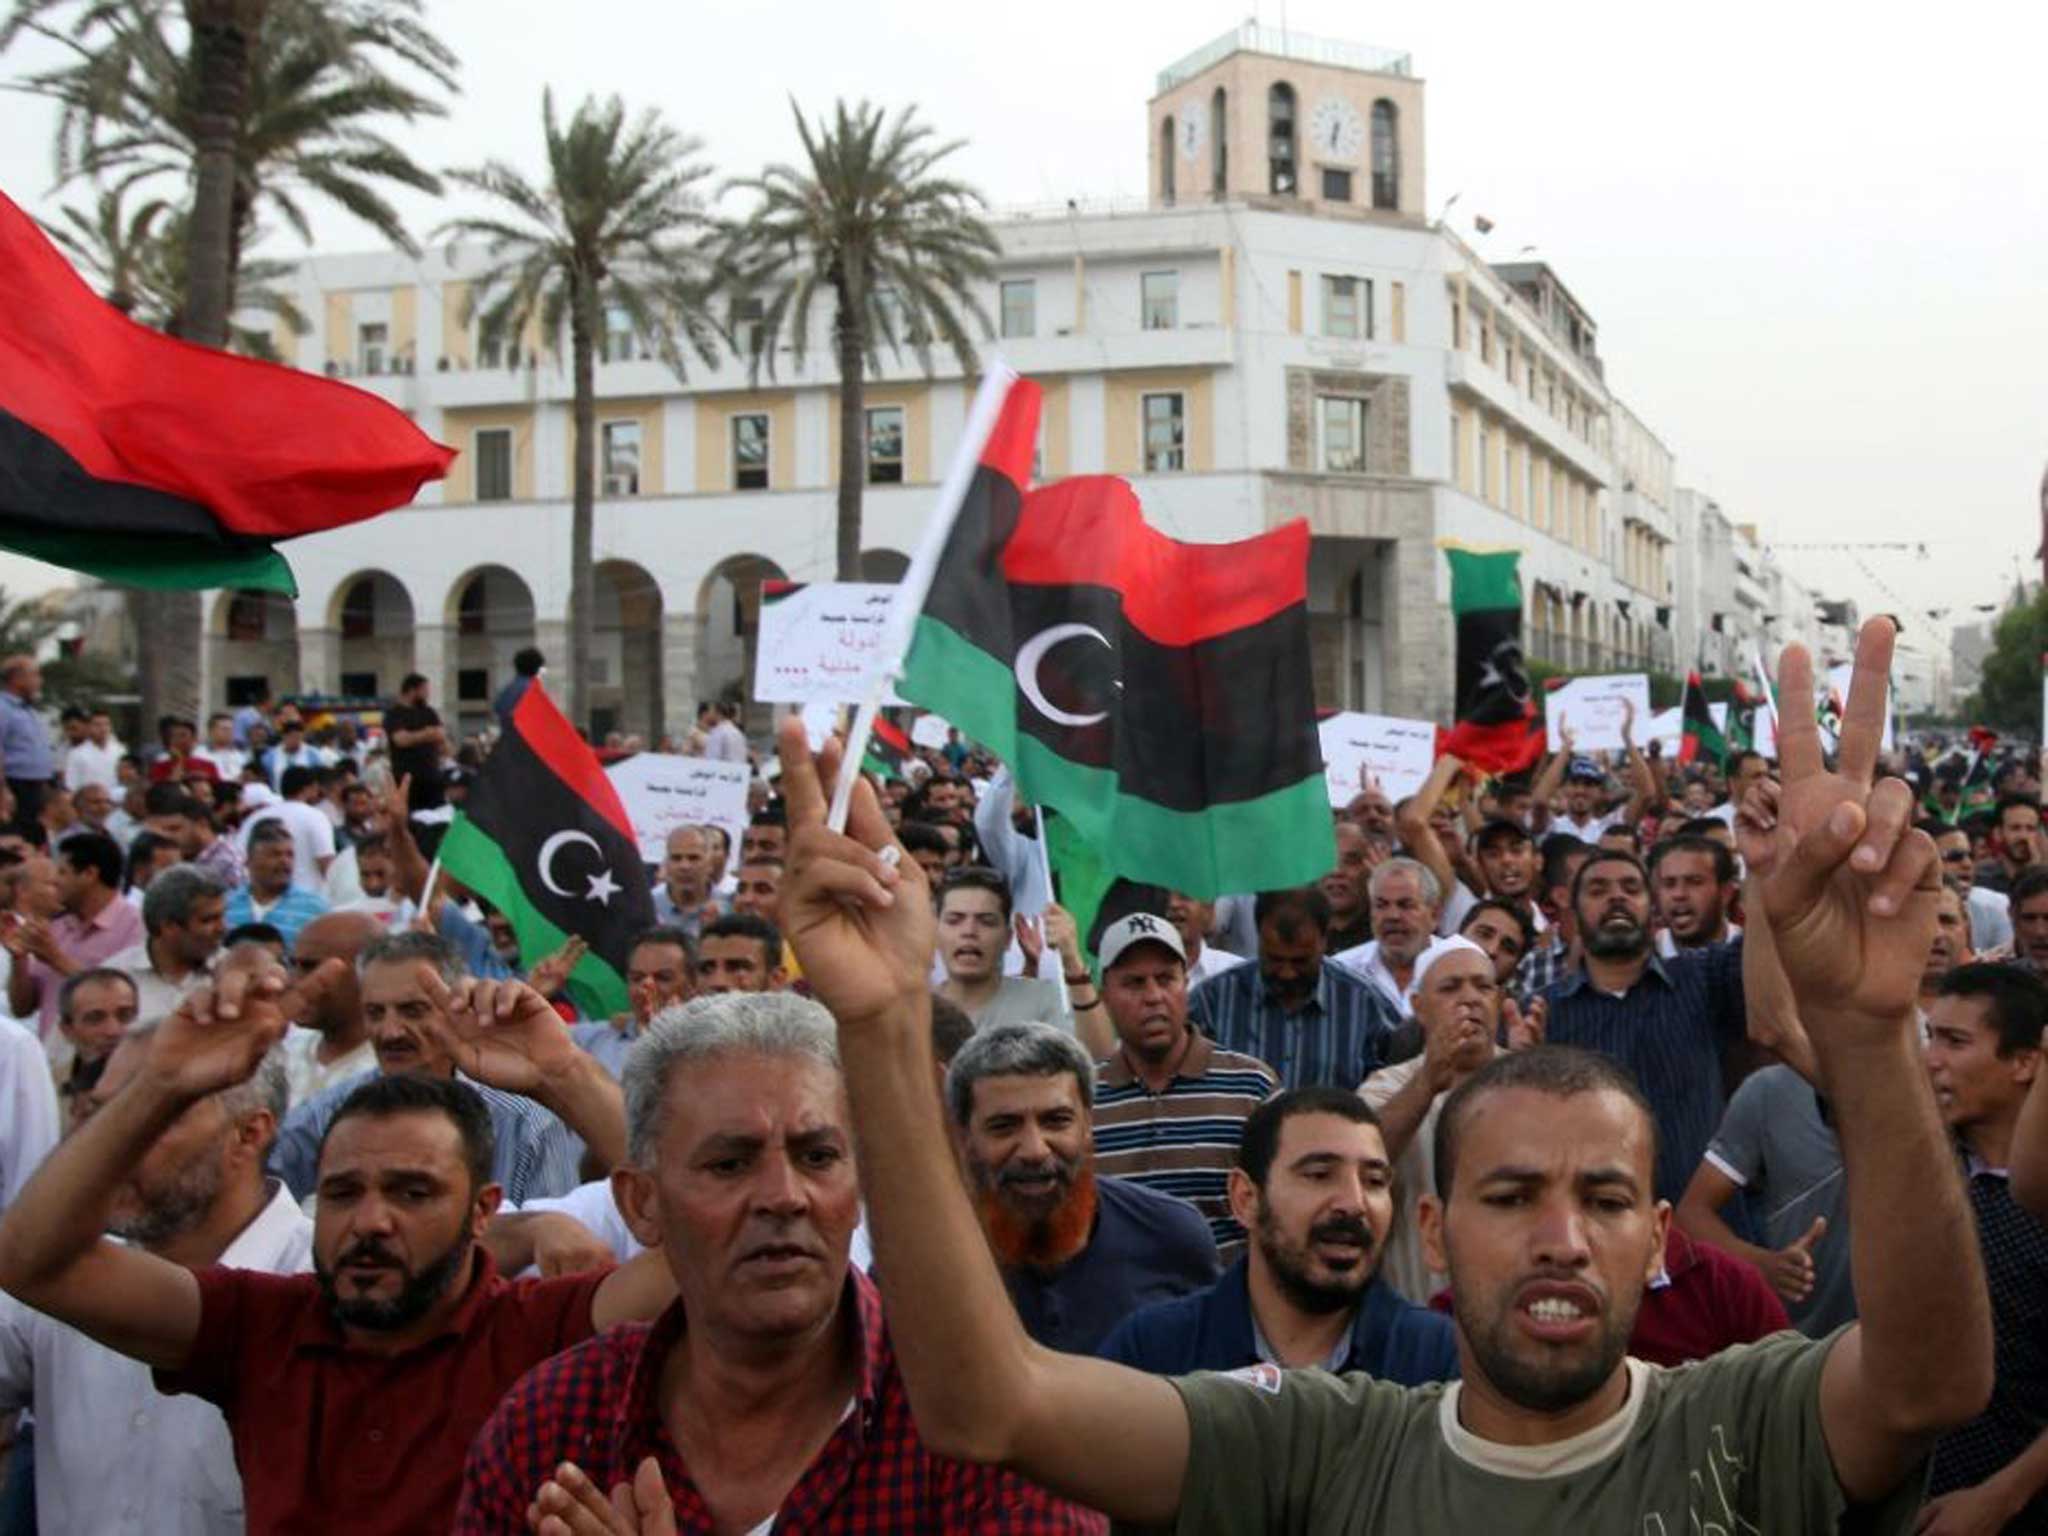 Defiant mood: Thousands of Libyans took to the streets on Friday in support of Hifter and to demand the suspension of the Islamist-led parliament